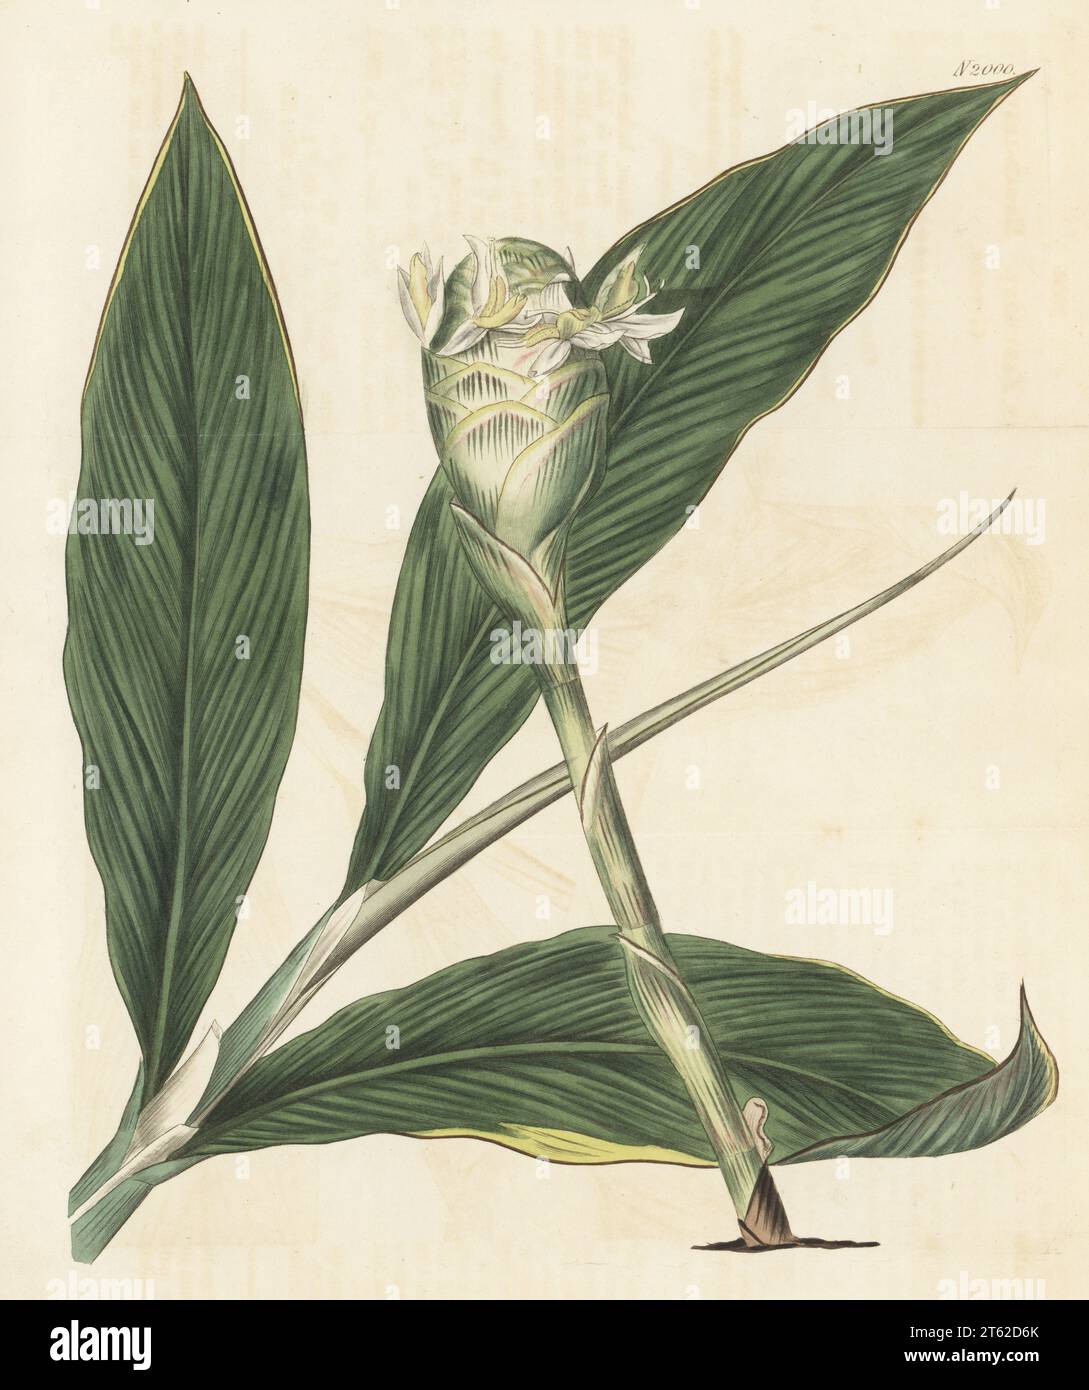 Bitter ginger or broad-leaved ginger, Zingiber zerumbet. Native of the East Indies, raised by William Anderson of the Apothecary's botanical garden at Chelsea. Handcoloured copperplate engraving after a botanical illustration by an unknown artist from Curtis’s Botanical Magazine, edited by John Sims, London, 1818. Stock Photo